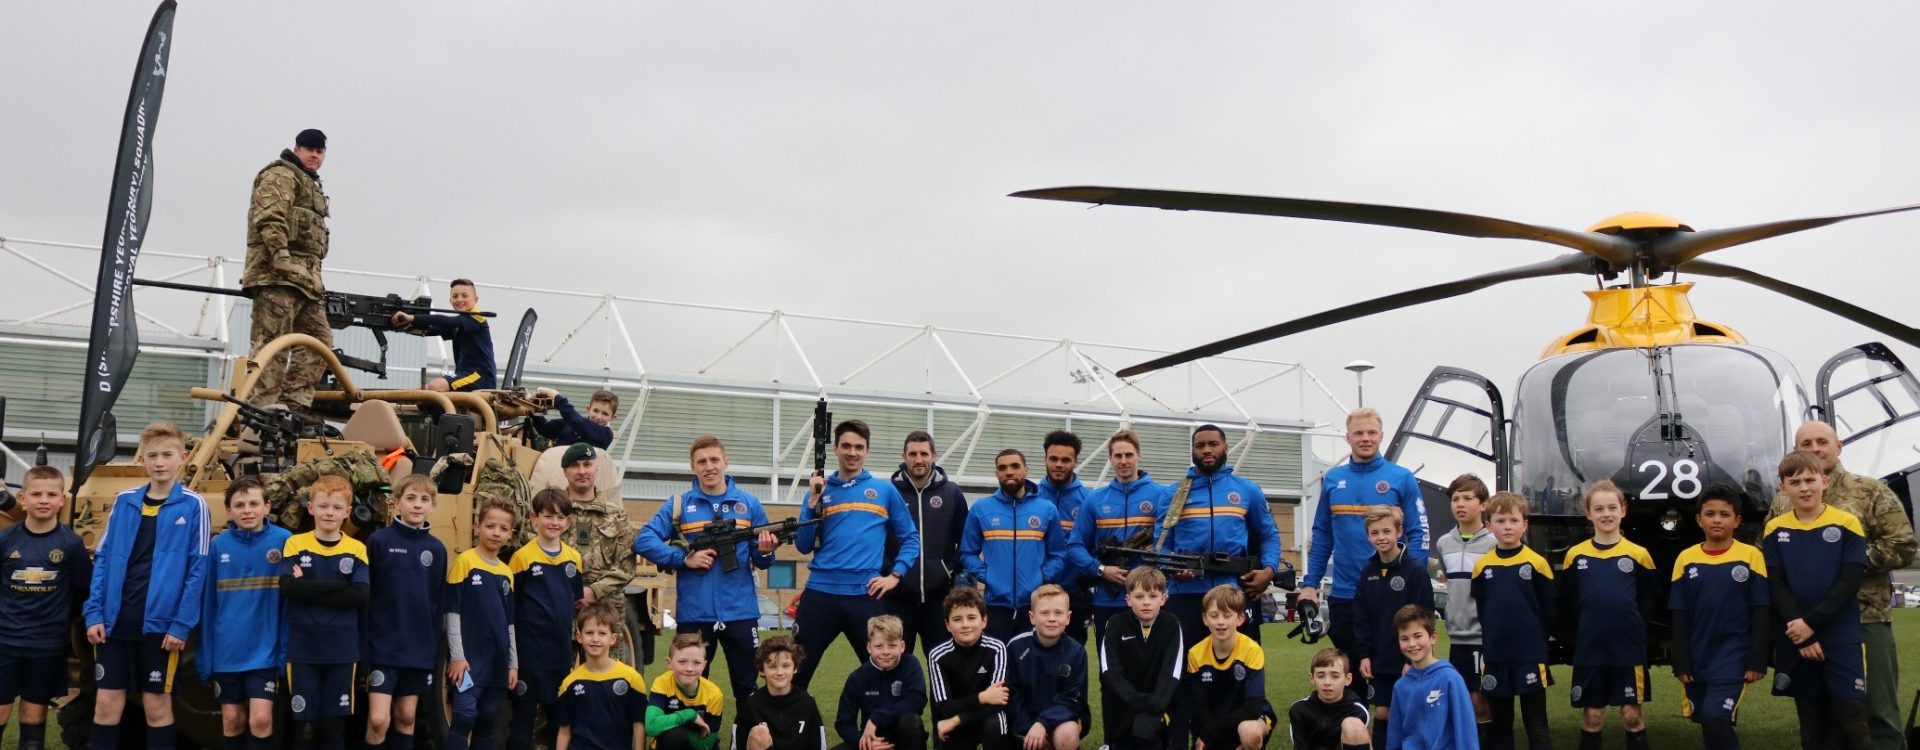 Group photo of armed forces, players and ADC squad promoting Community Day